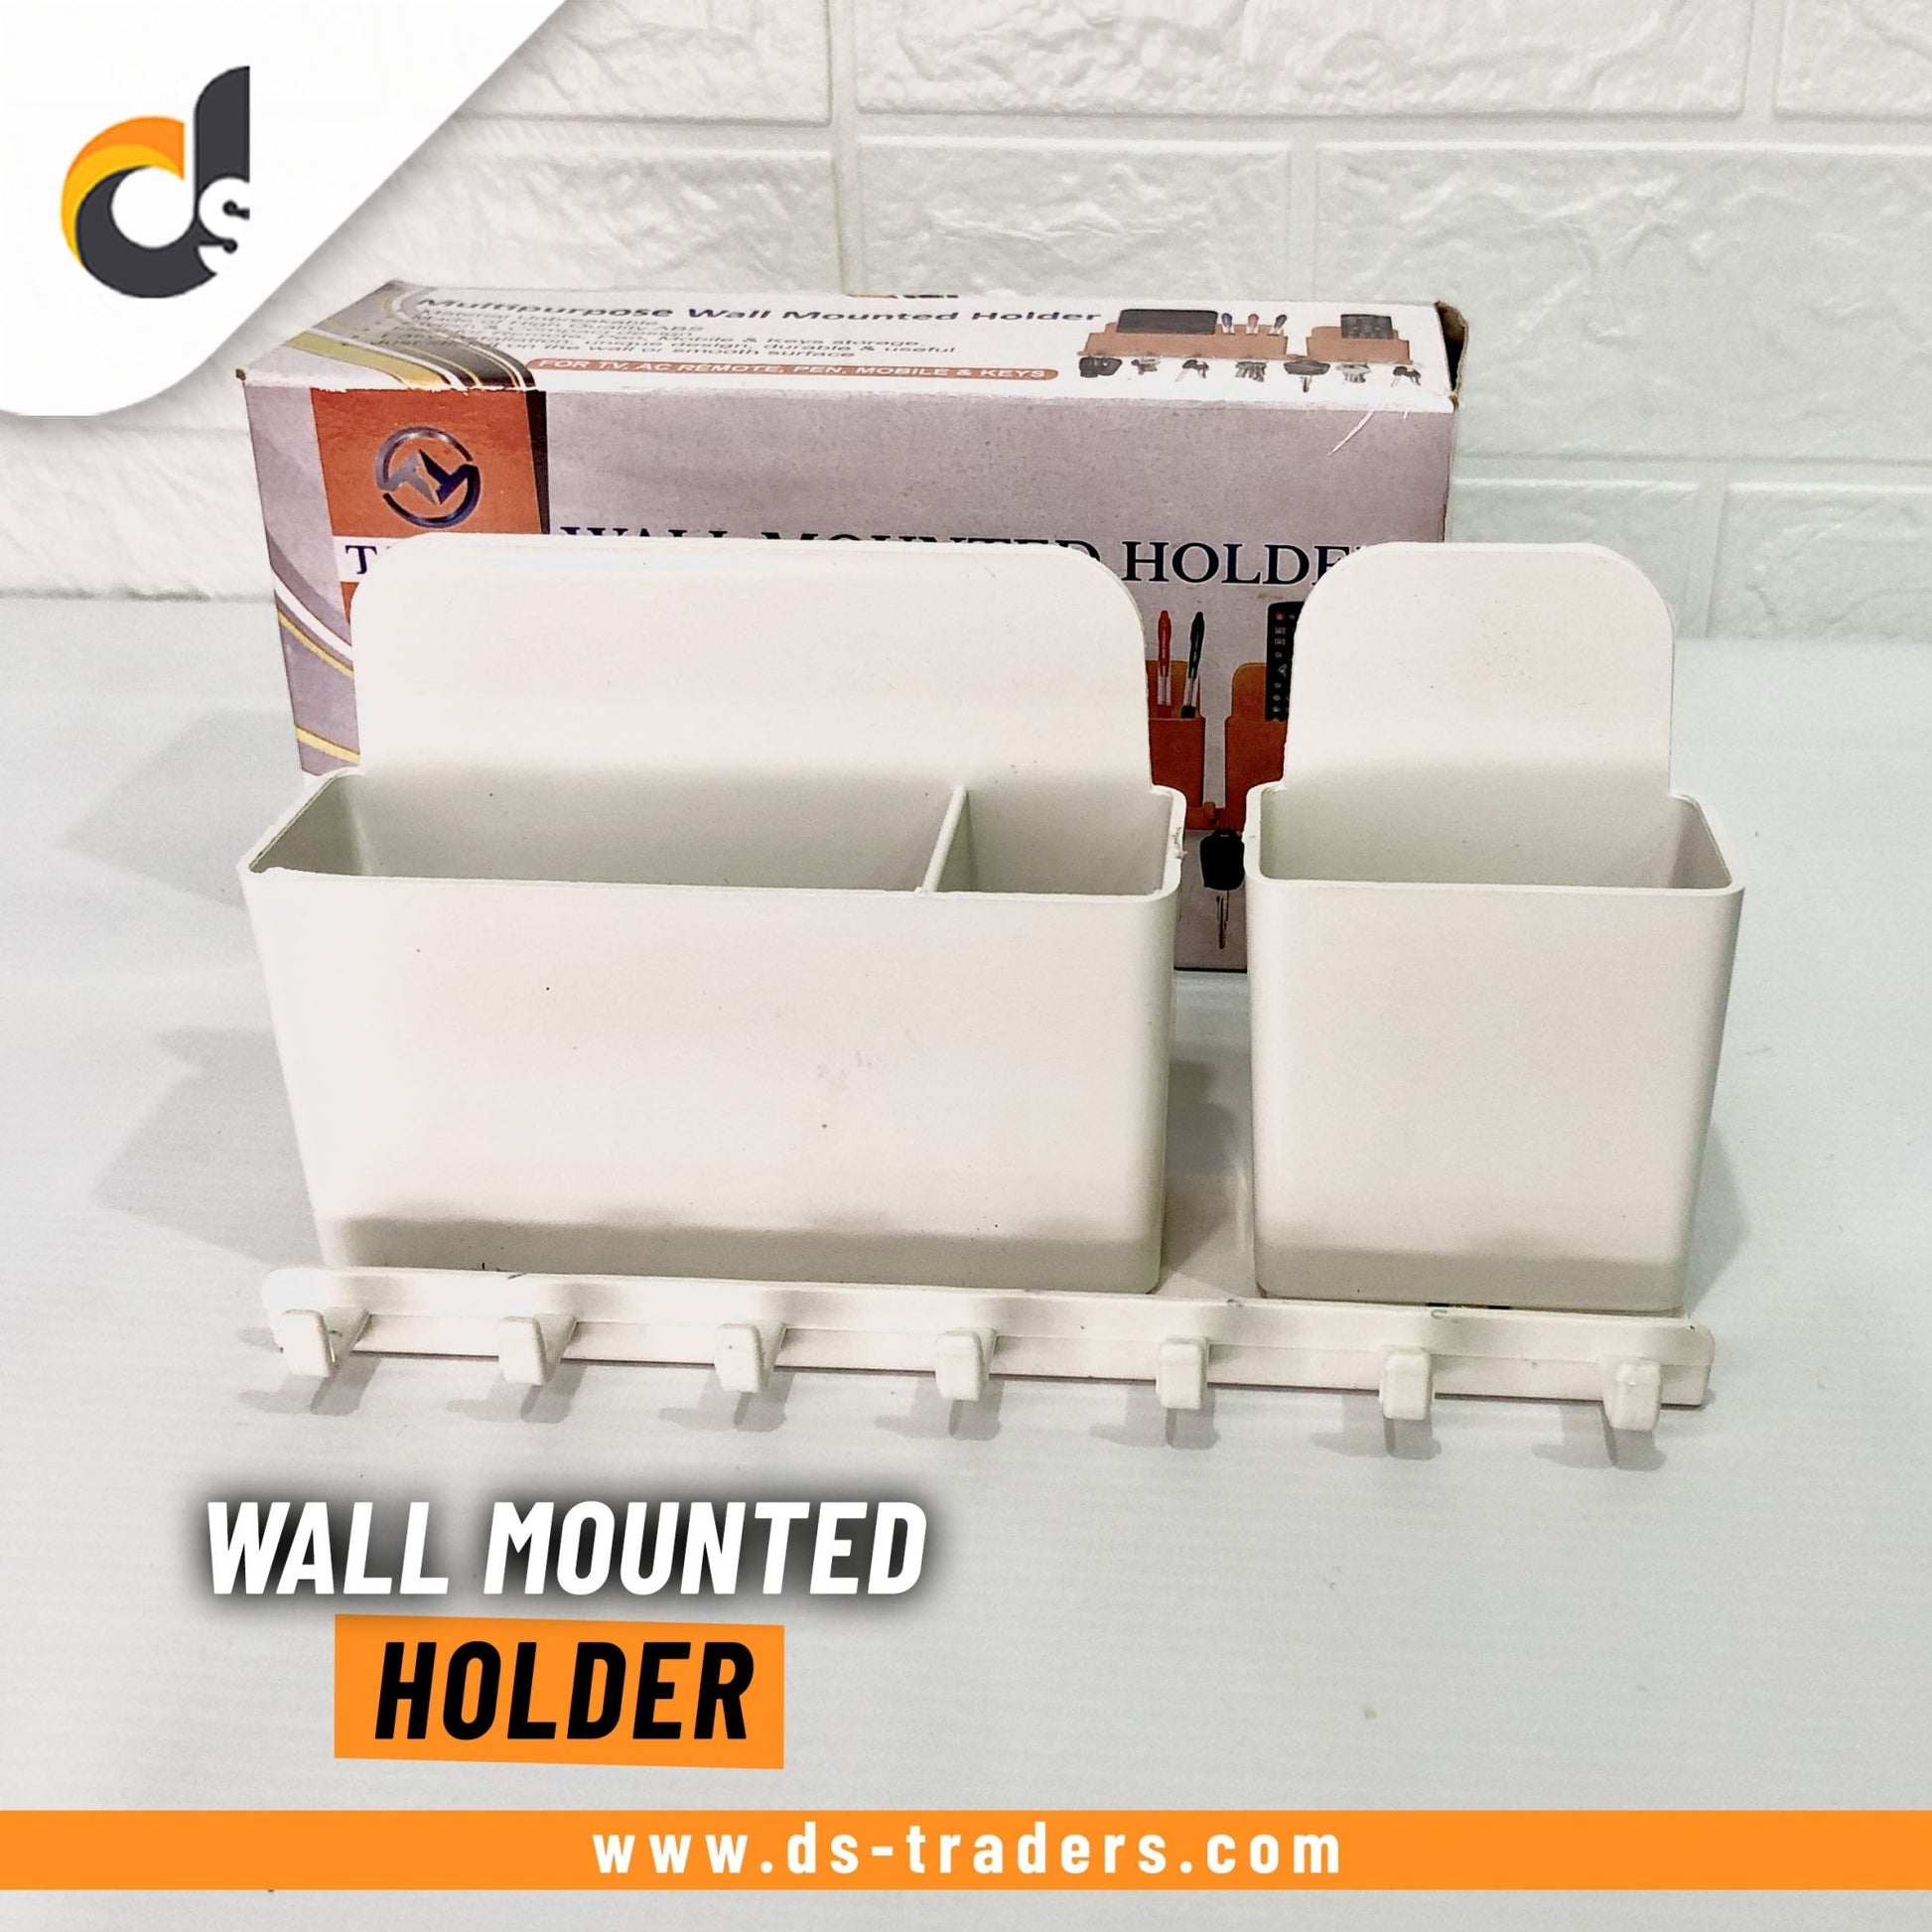 Multi-Functional Wall Mounted Holder - DS Traders